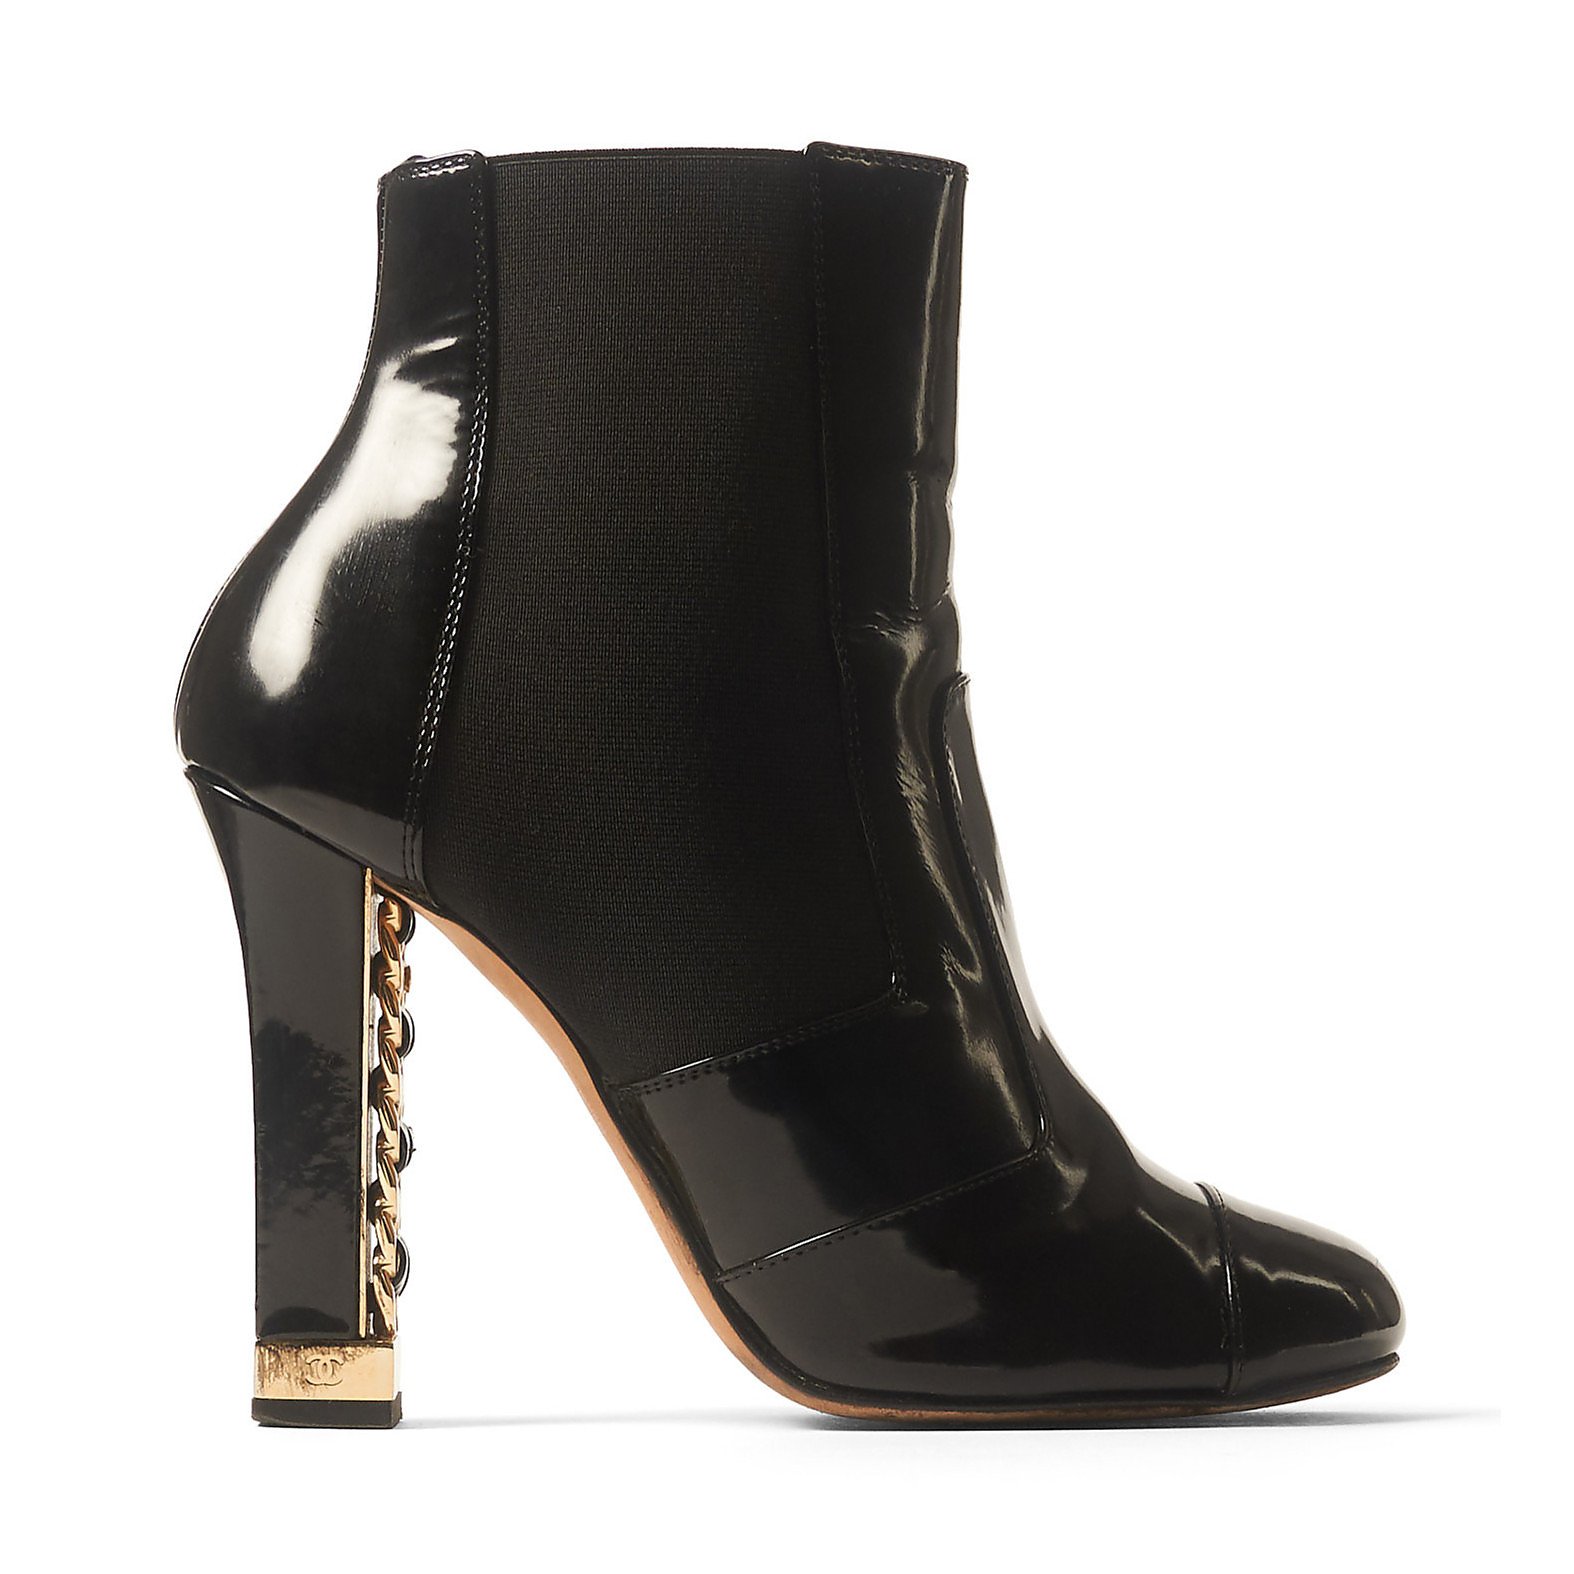 CHANEL Patent High Heel Boots 